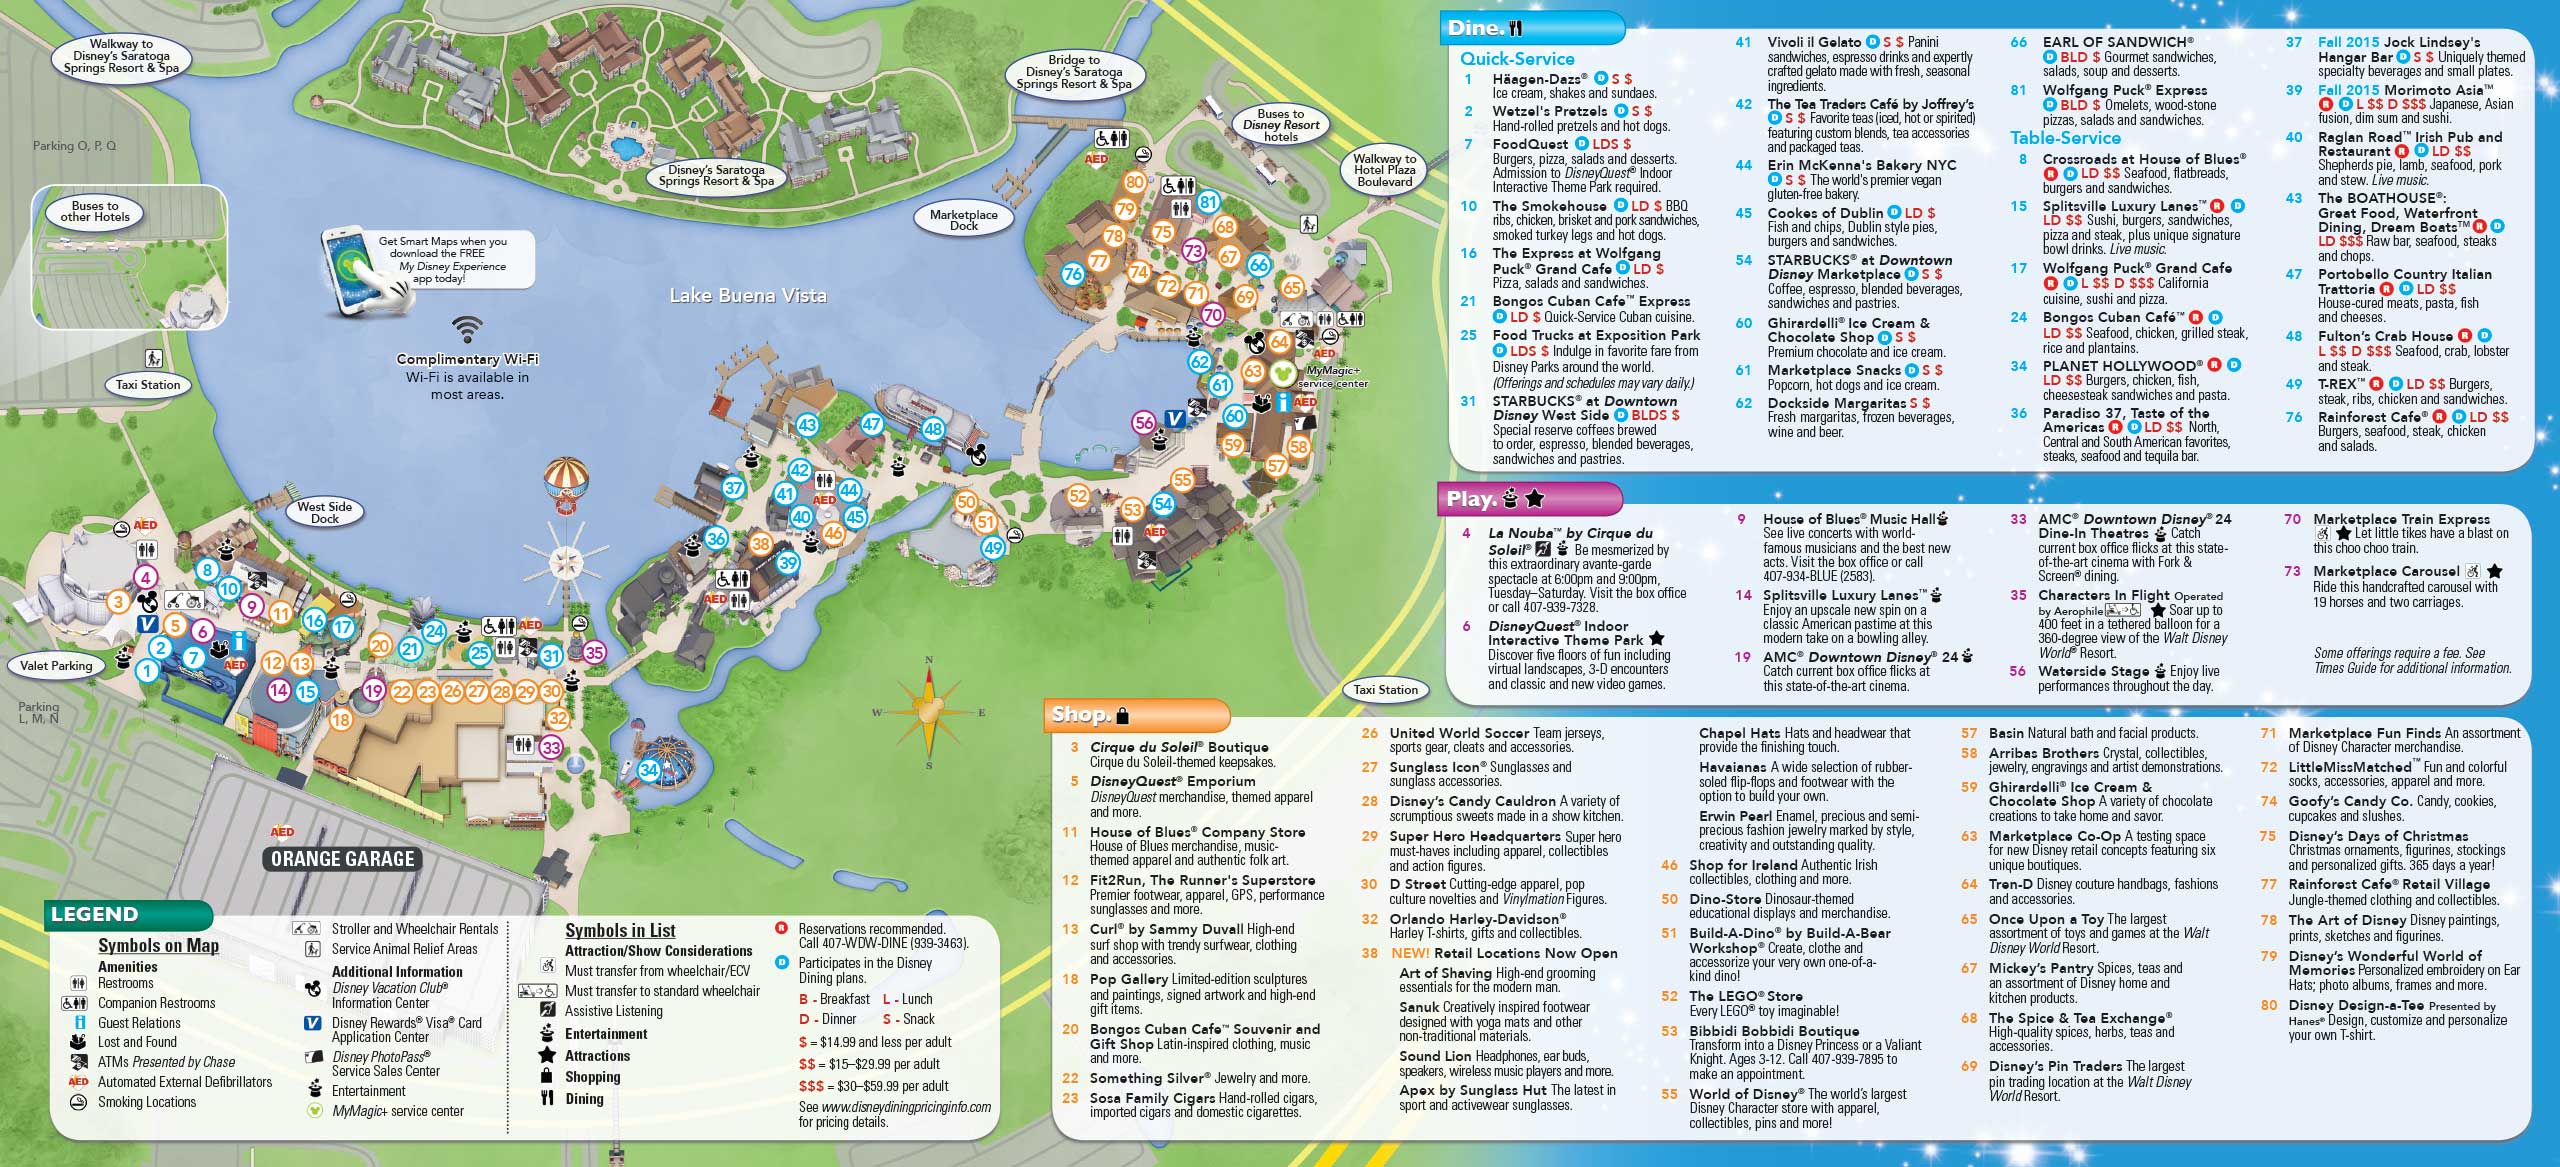 disney-springs-downtown-disney-guide-map-aug-2015-photo-2-of-2